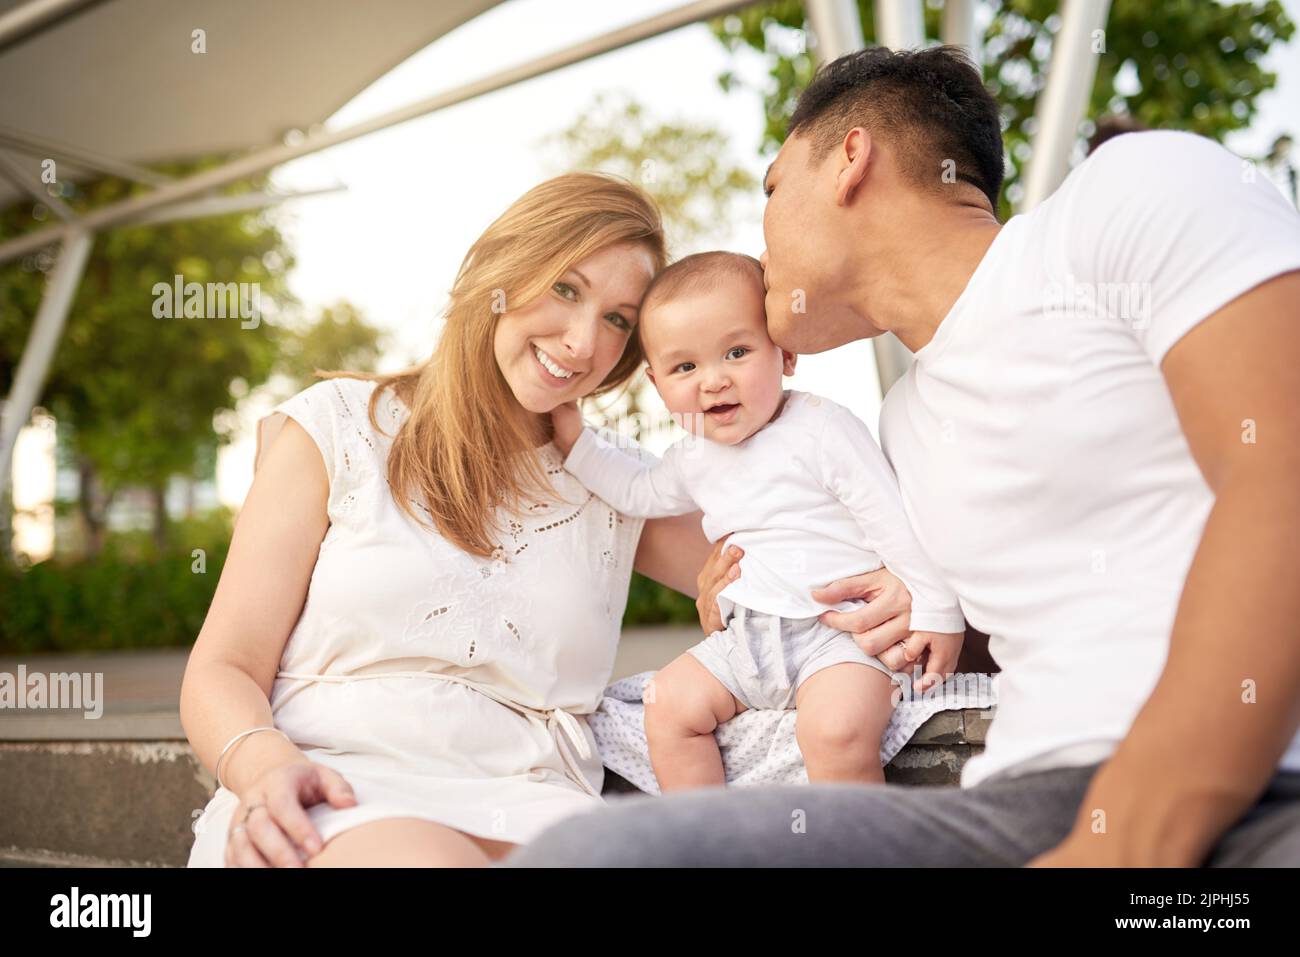 Group portrait of loving mixed-race parents sitting at green public park and cuddling their cute little son, attractive Caucasian woman looking at camera with wide smile Stock Photo